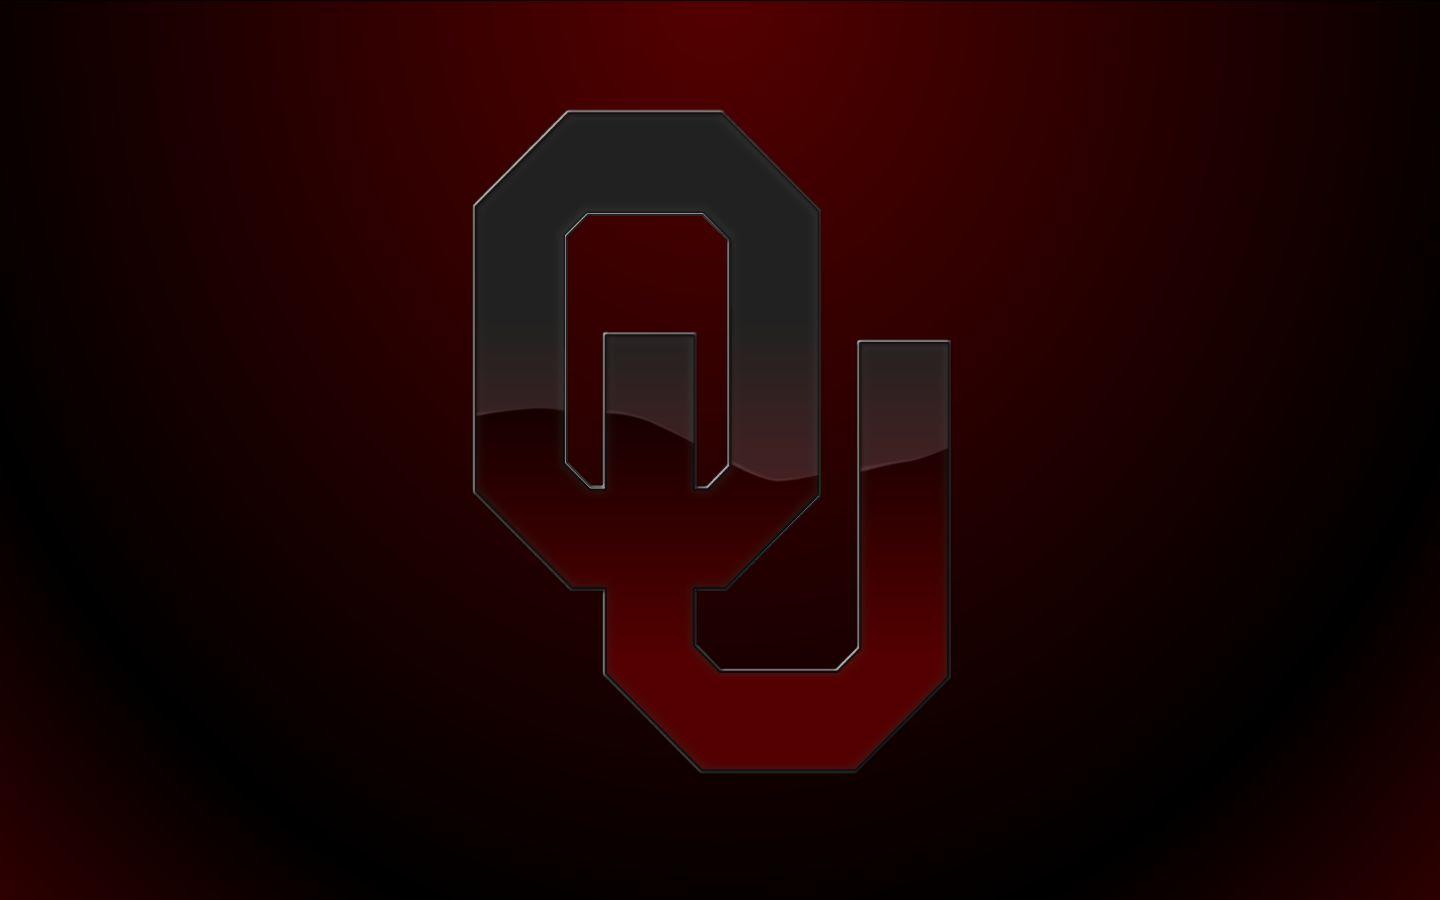 Oklahoma Sooners Wallpaper, Browser Themes & More